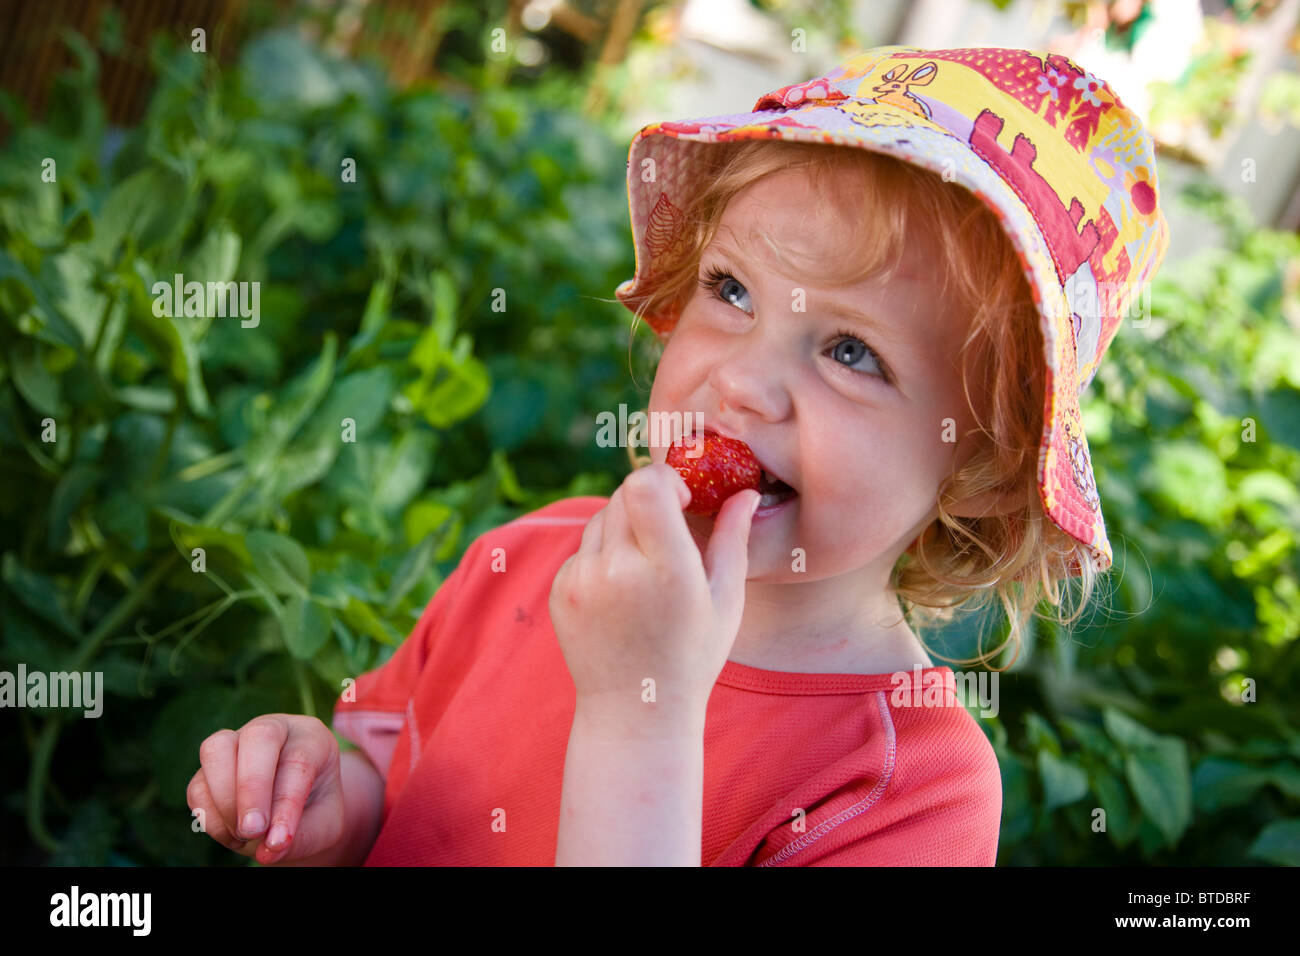 View of toddler girl eating home grown strawberries fresh out of the garden, Anchorage, Southcentral Alaska, Summer Stock Photo